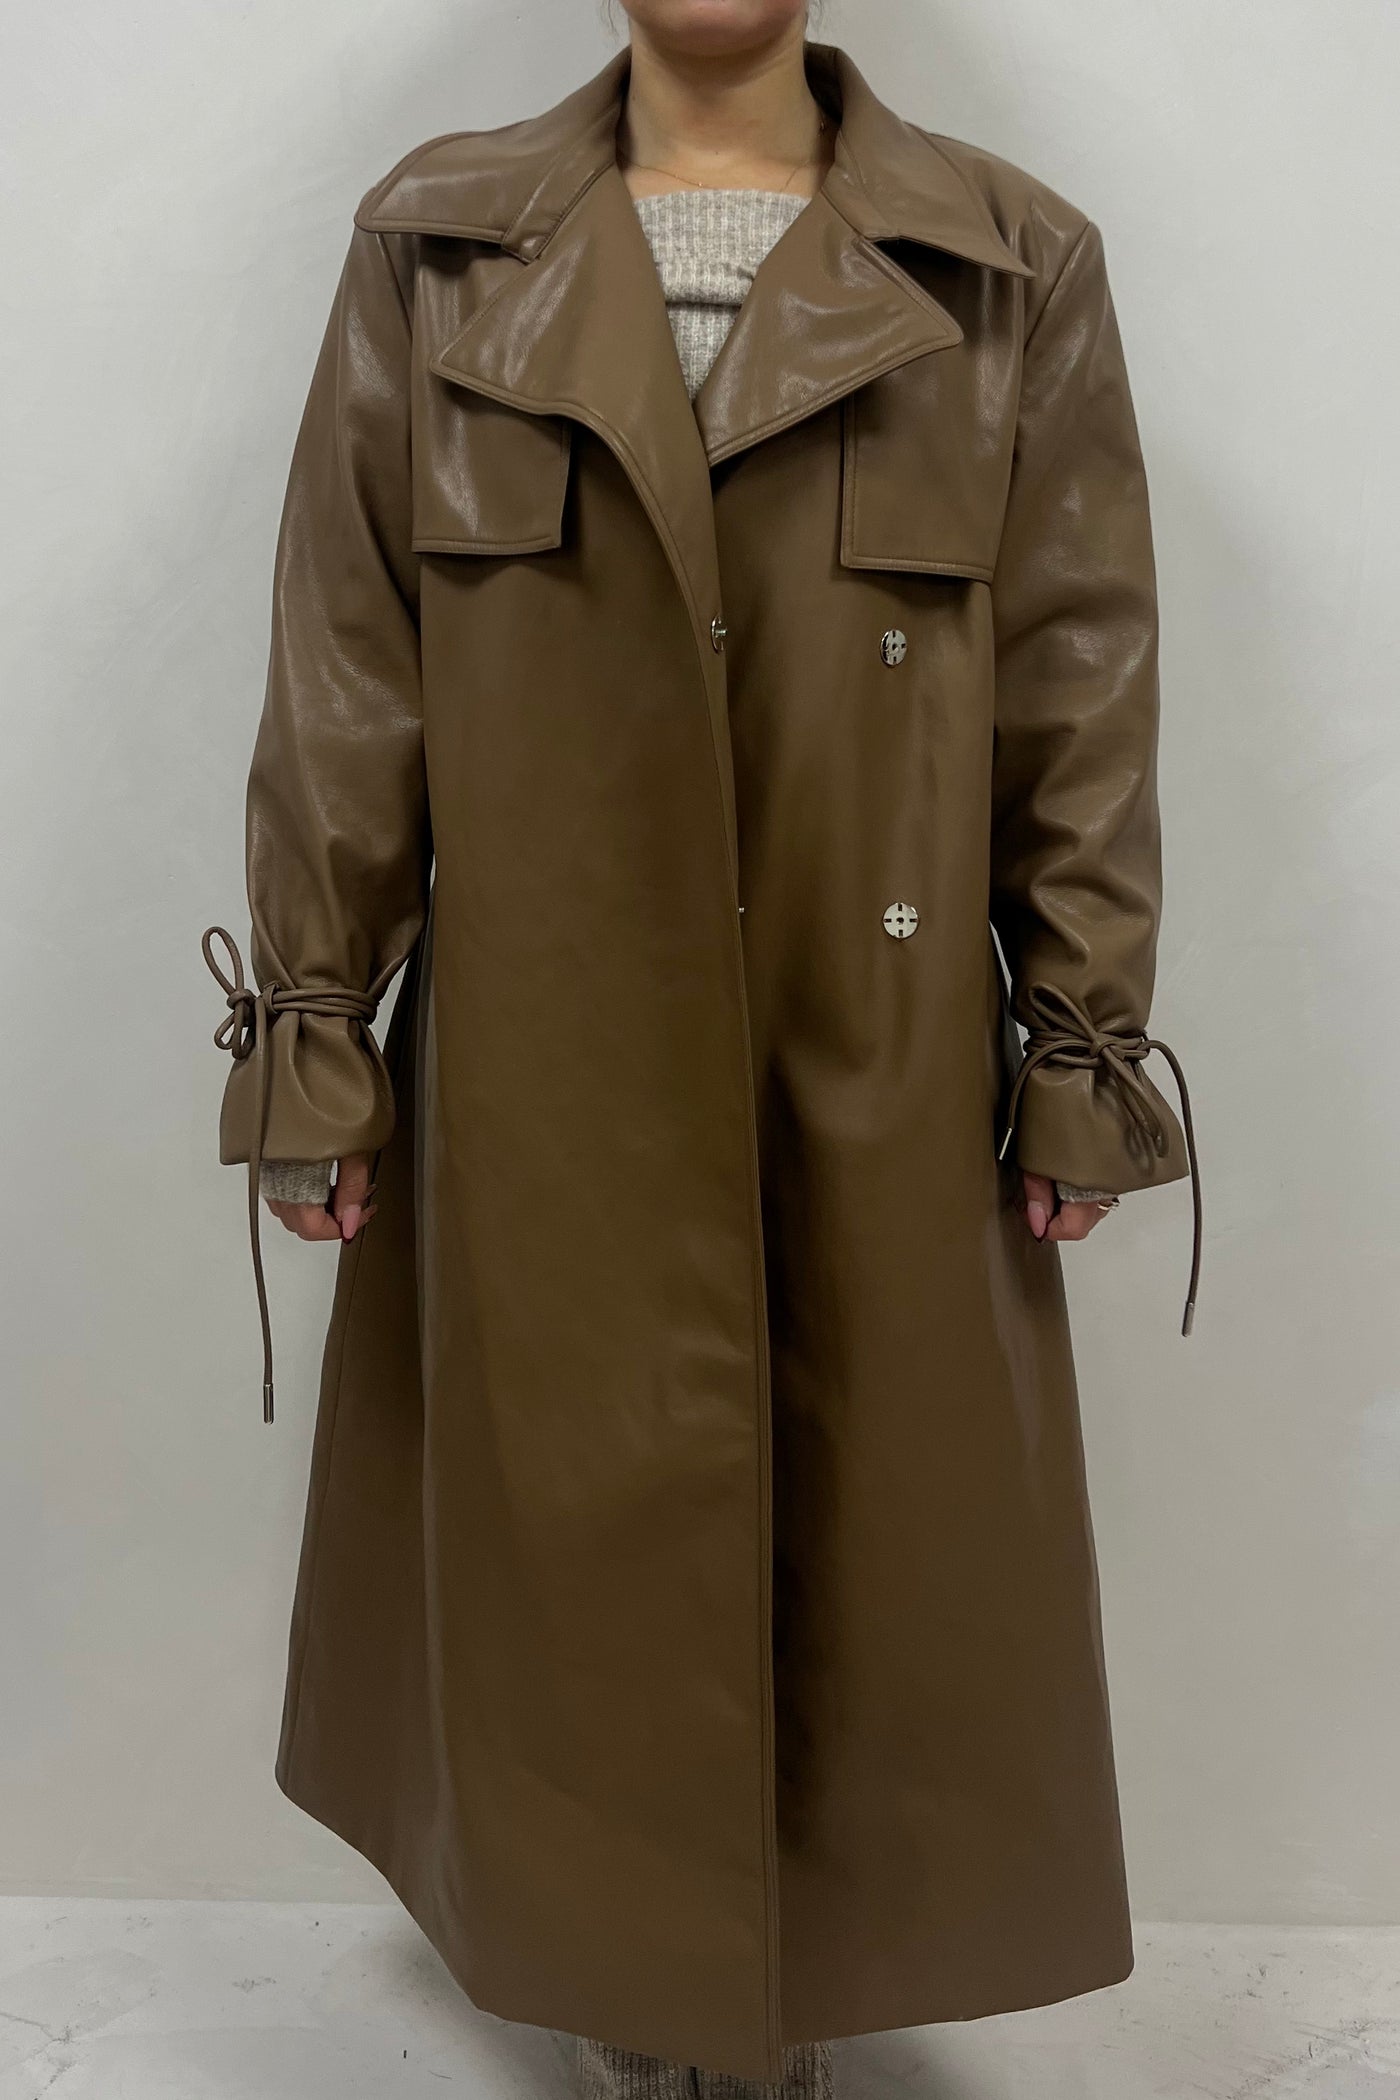 SAMPLE SALE-CHOCOLATE TRENCH SAMPLE S